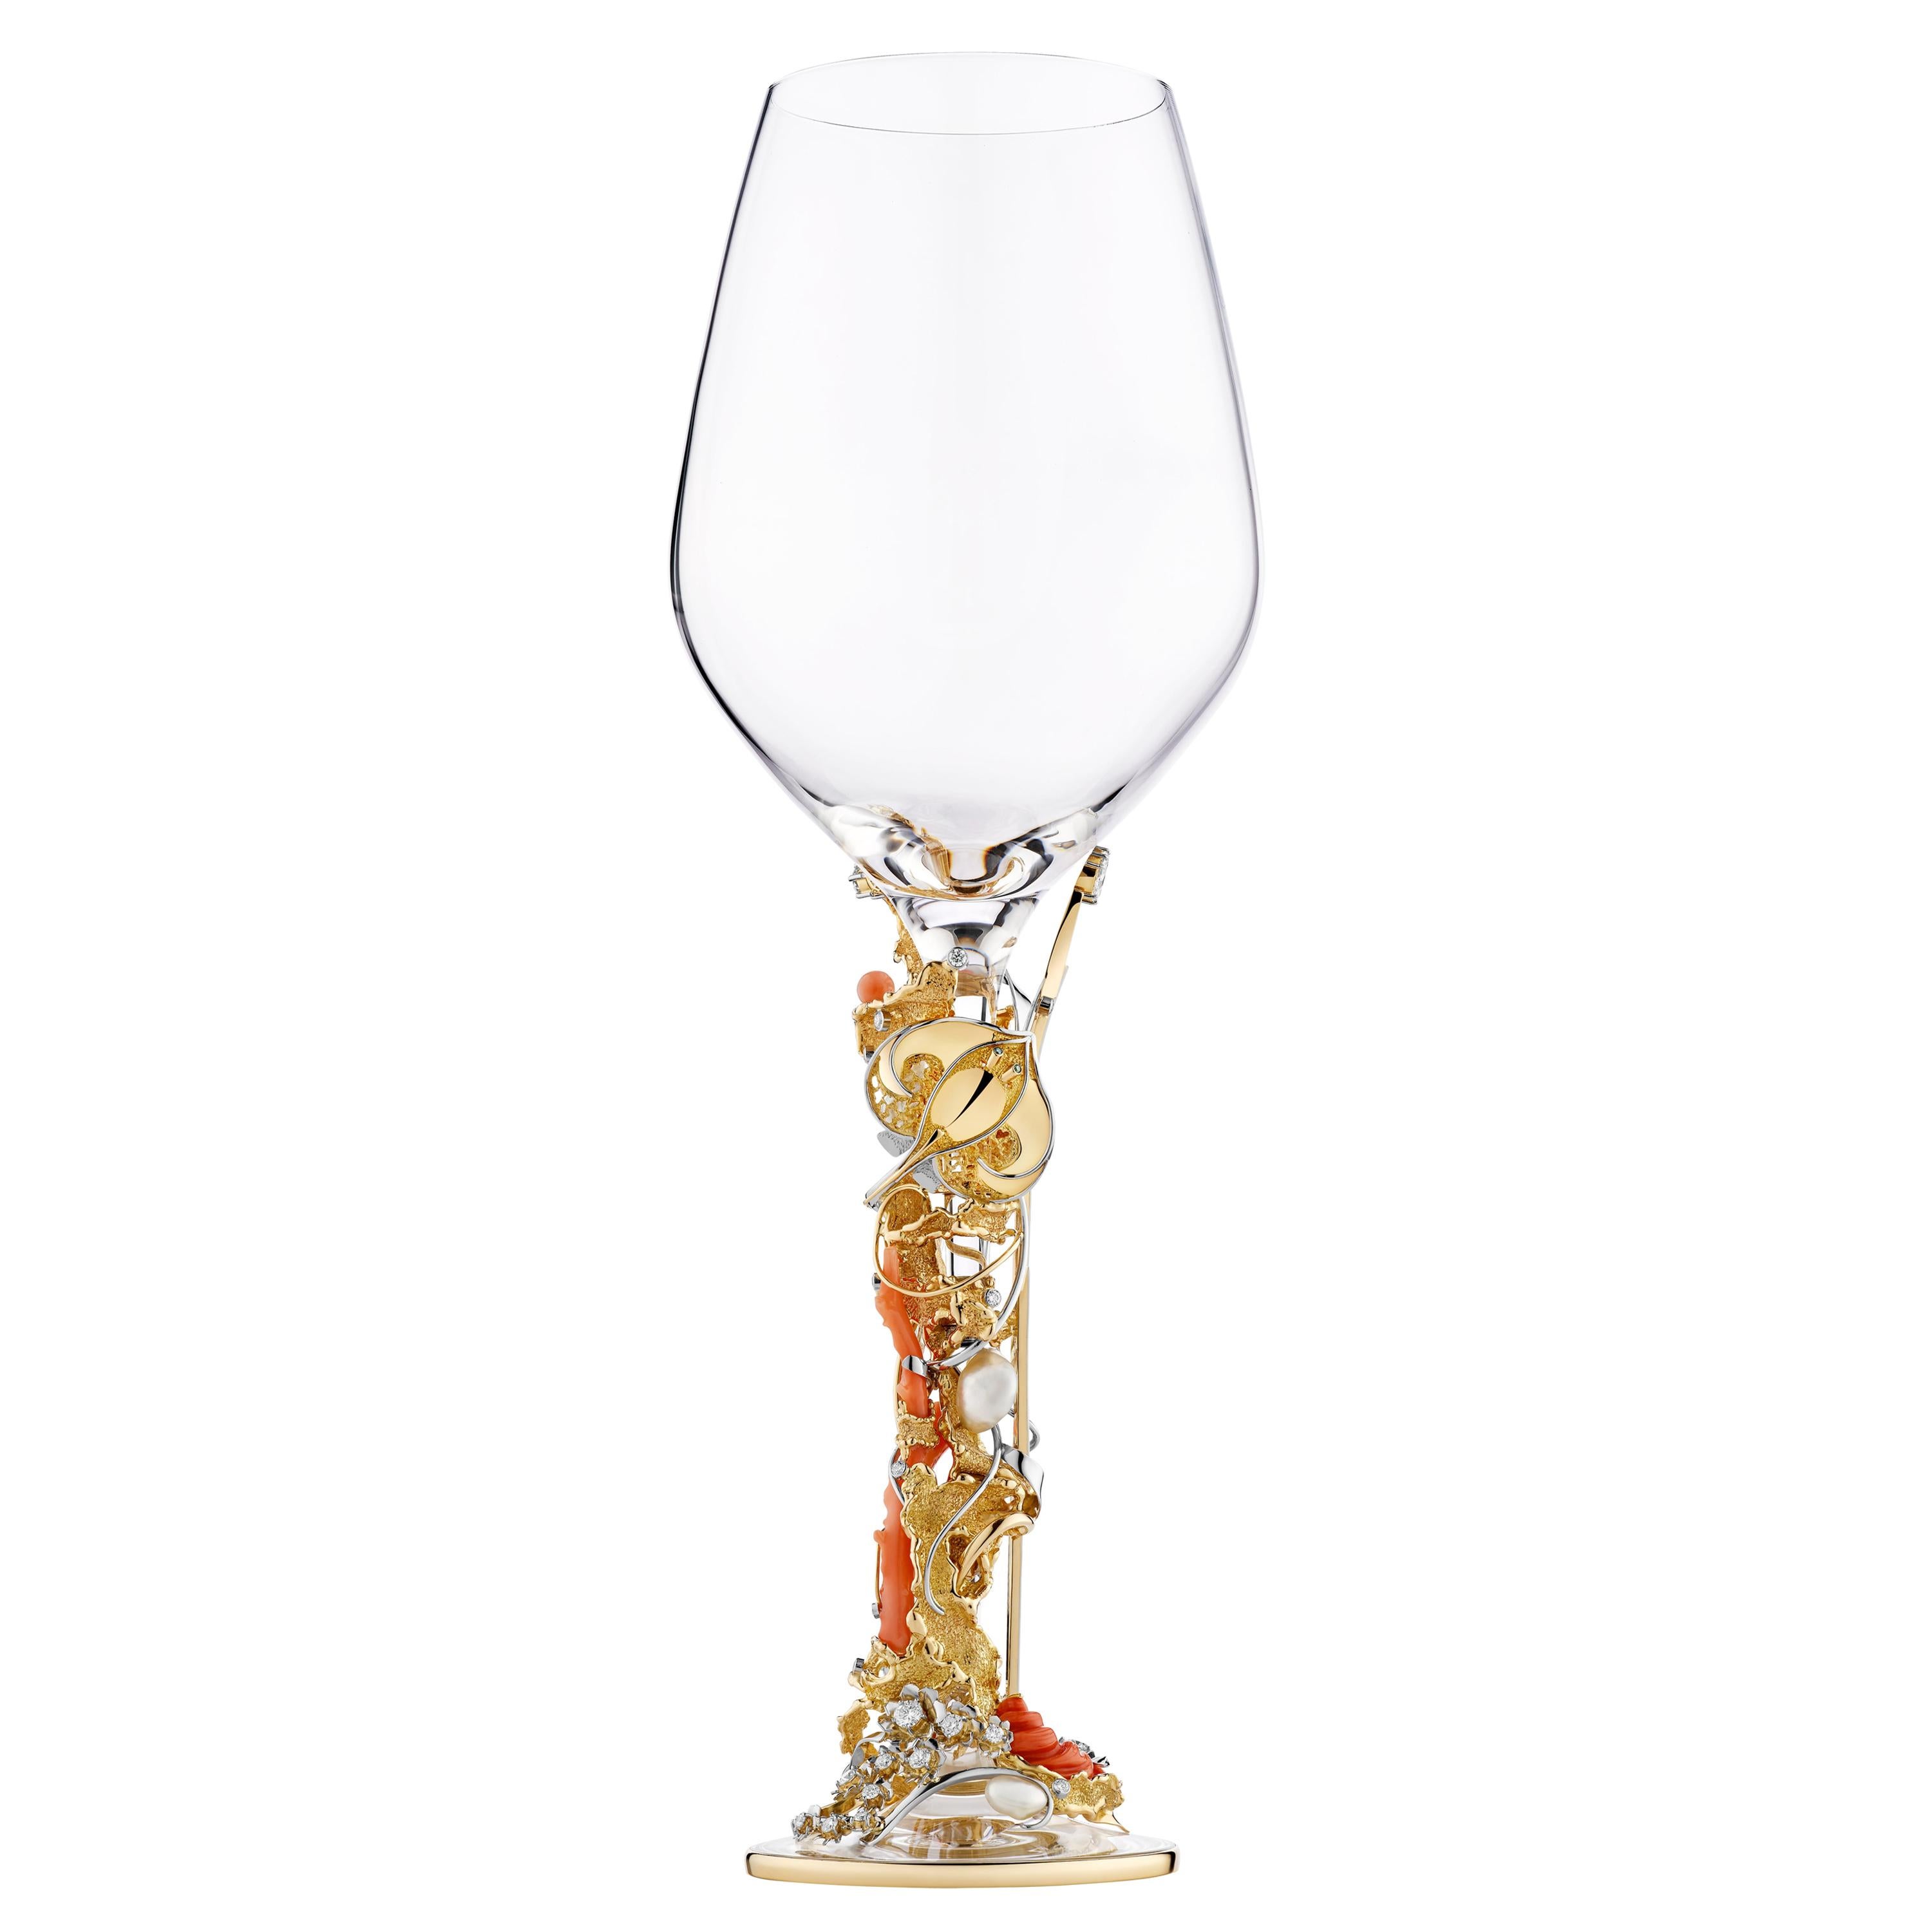 “OCEANA” Stingray Champagne and Wine Stemware

“Oceana” was designed and hand crafted by multi award-winning jeweller Paul Amey in Australia. Stamped with his registered makers mark and precious metal marks. “Oceana” was designed and completed with